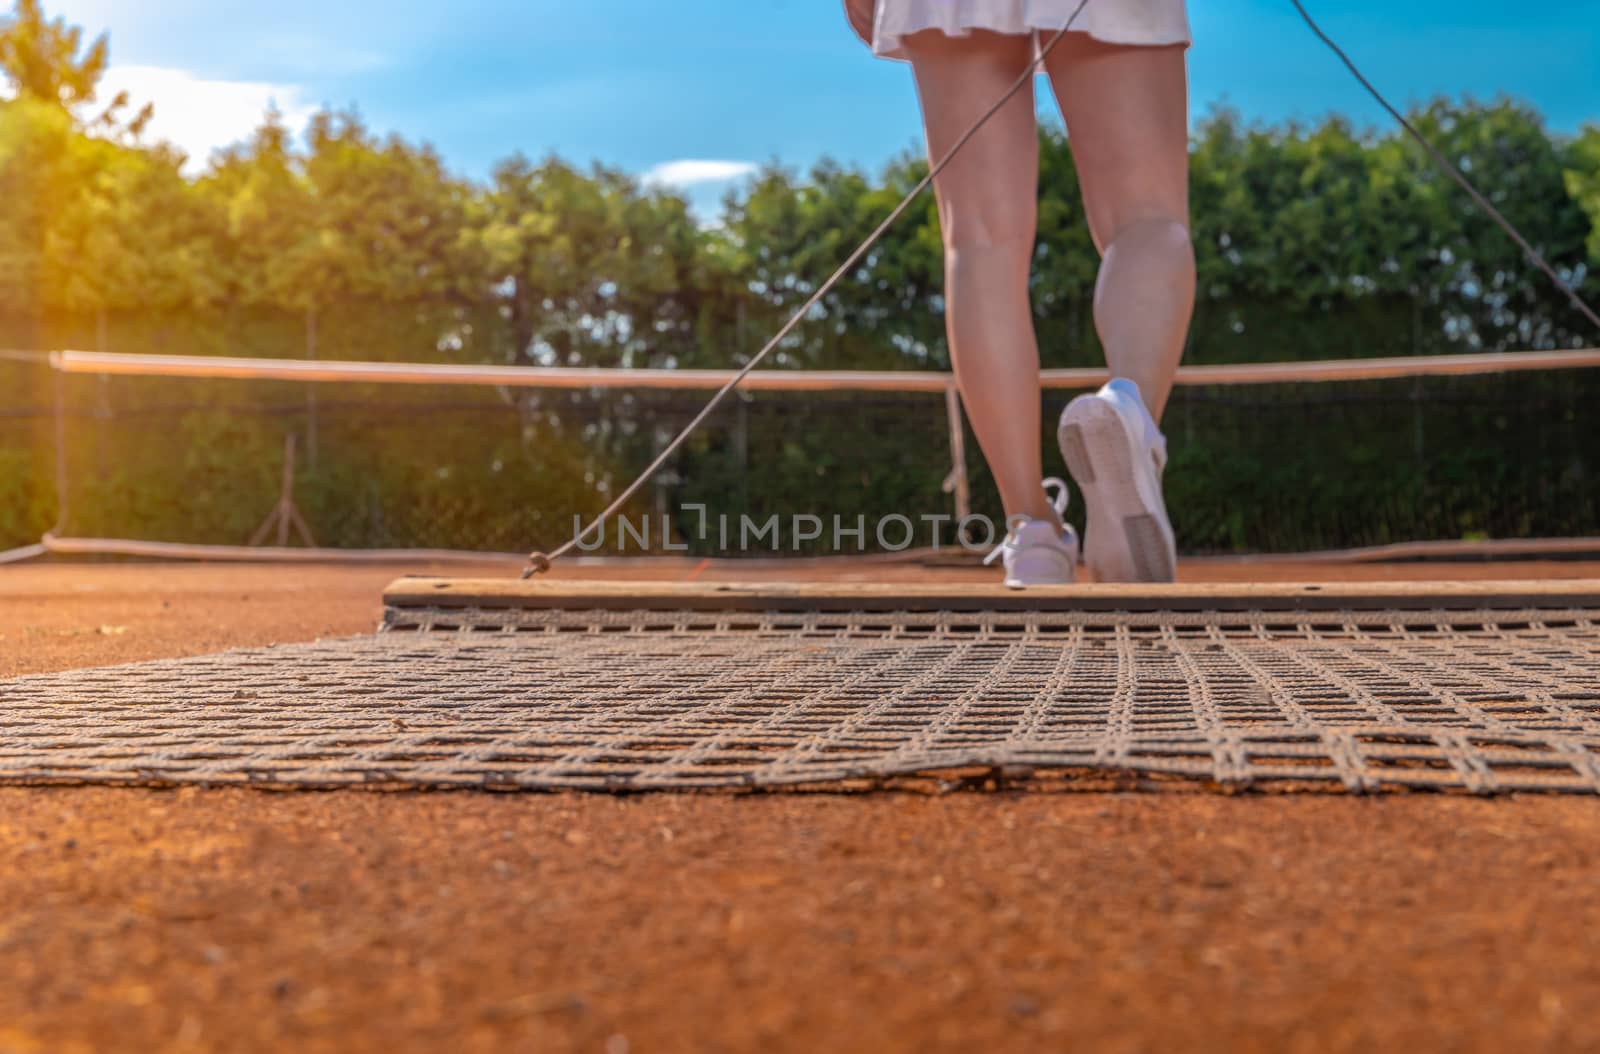 sweeping orange clay on an outdoor tennis court